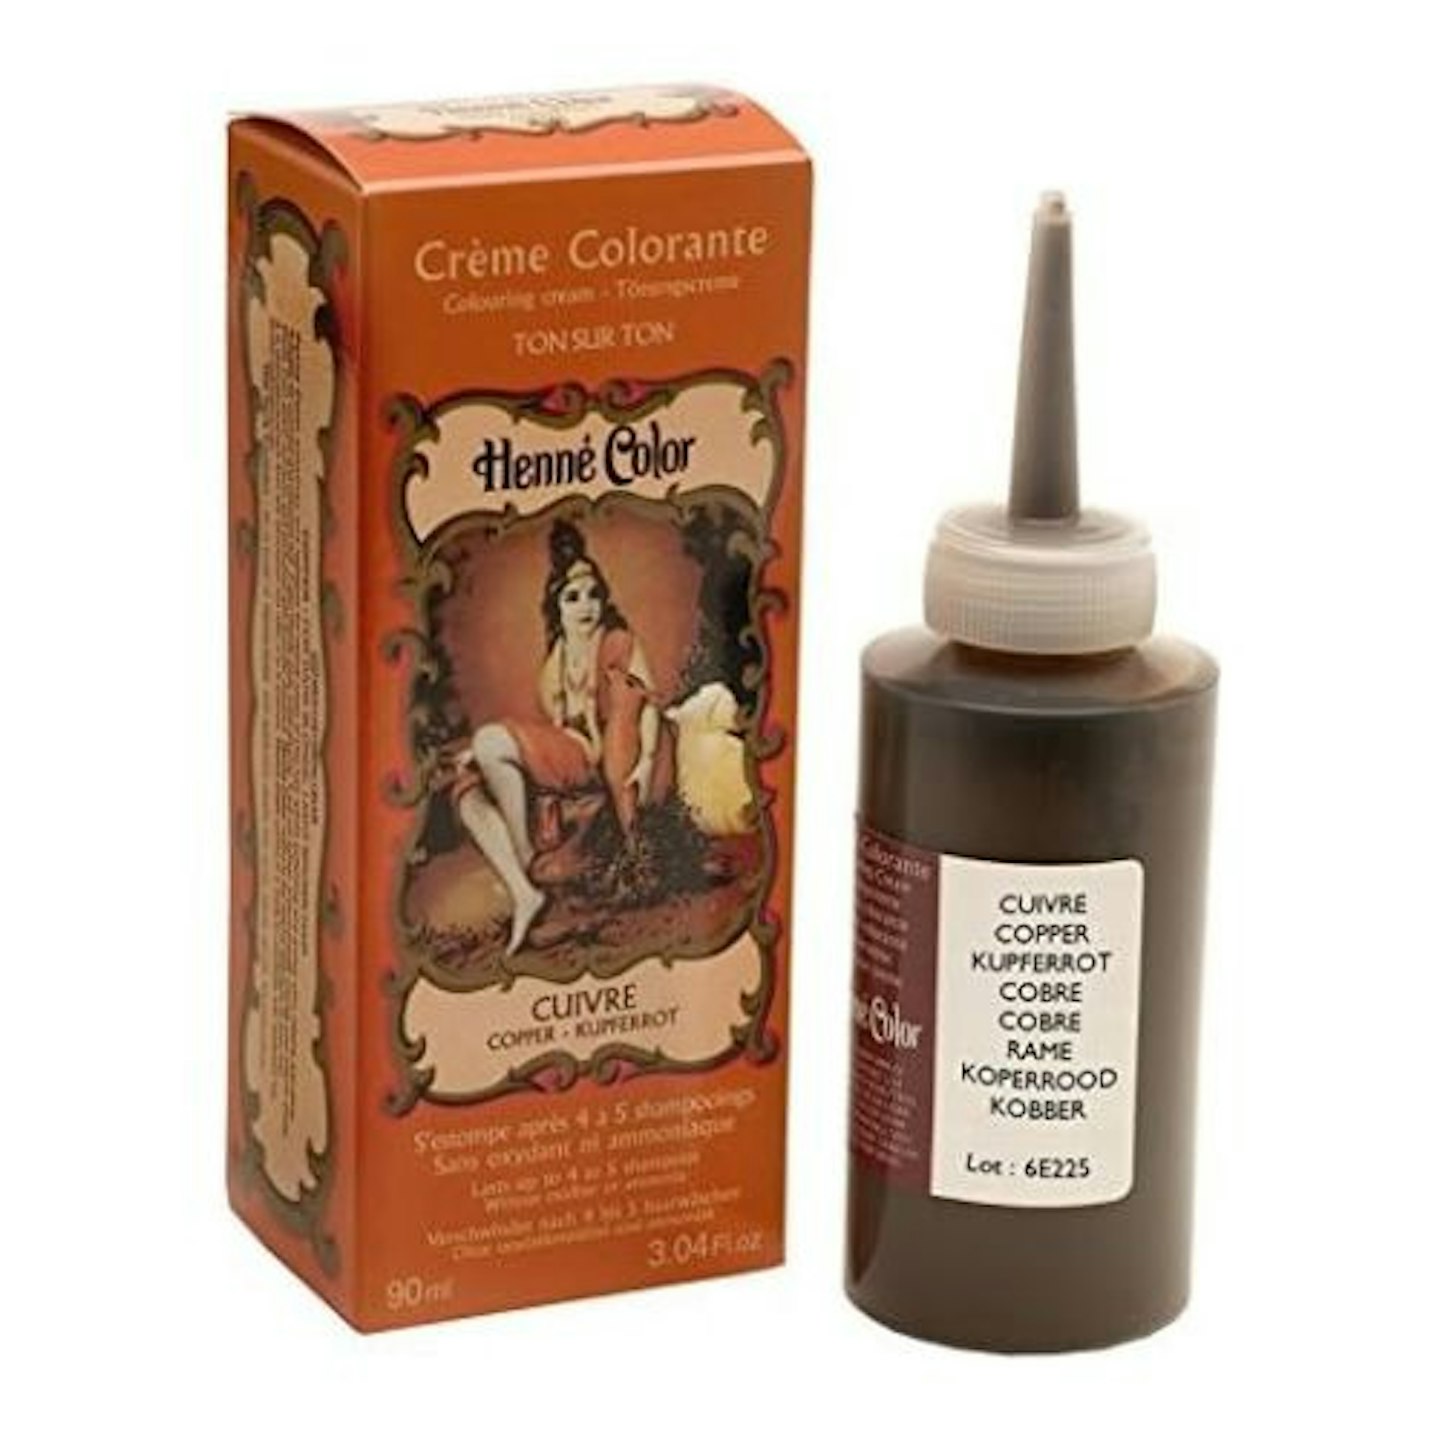 Henne Color Henna Hair Colouring Cream in Copper